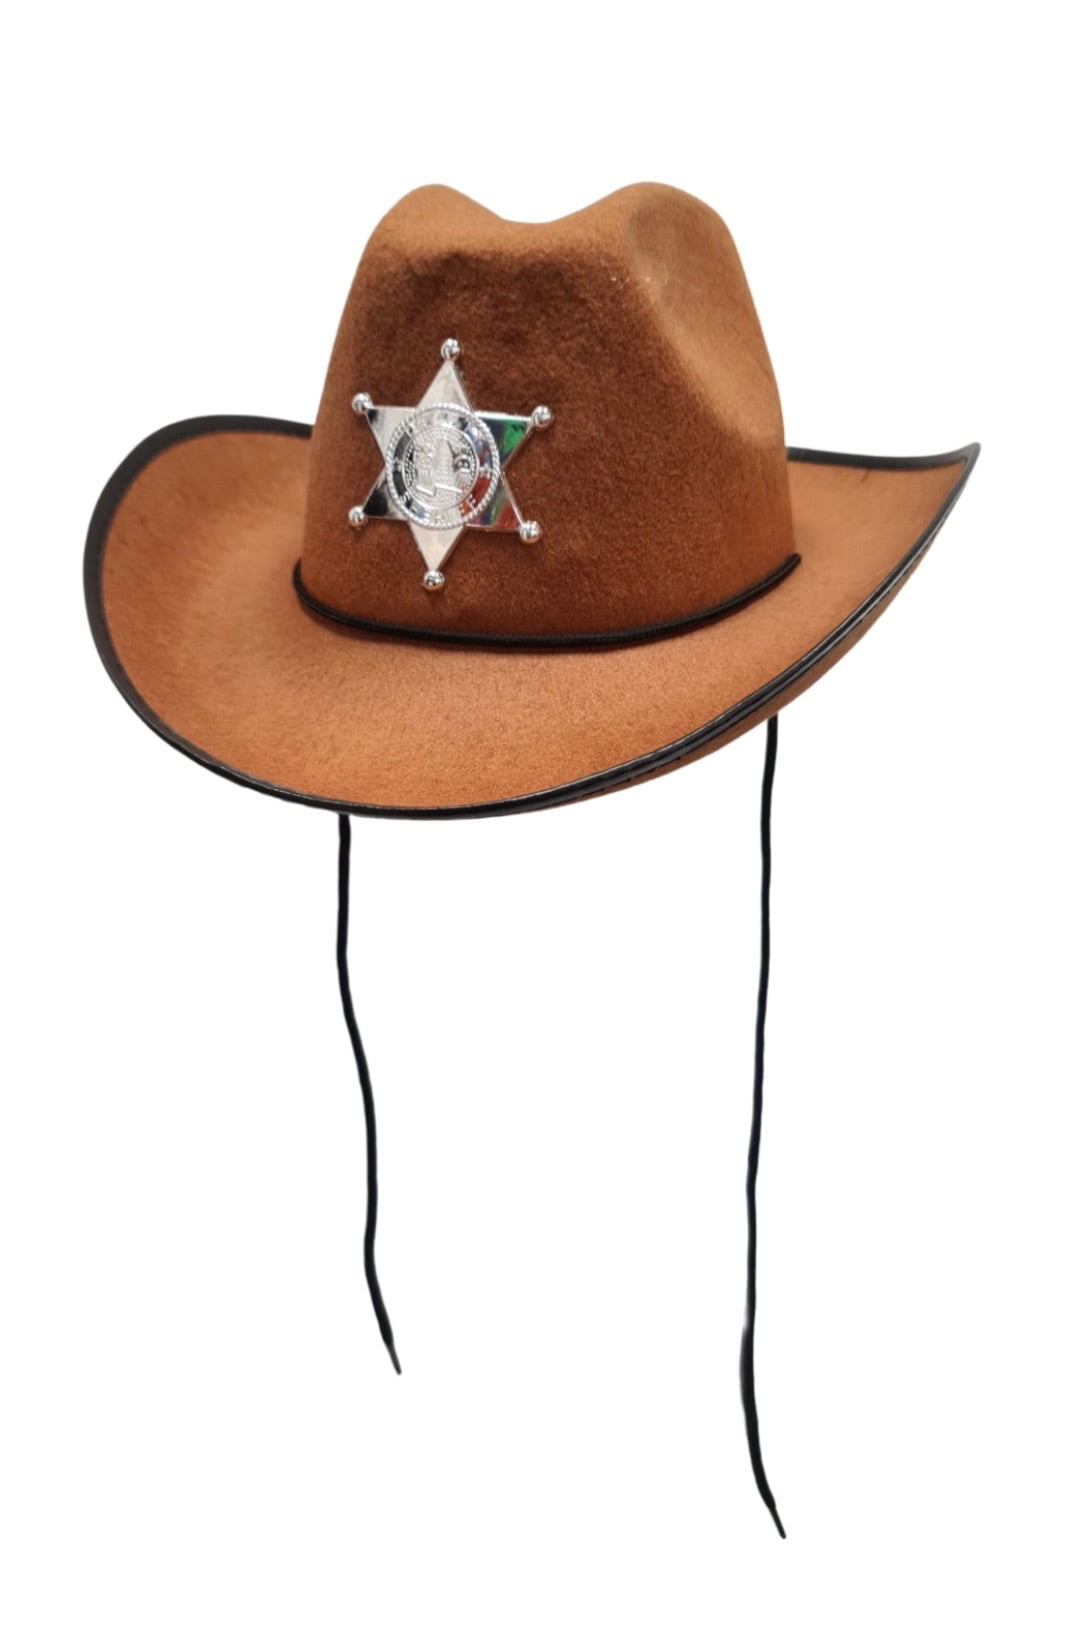 Featured image for “Sherif Cowboy Hat”